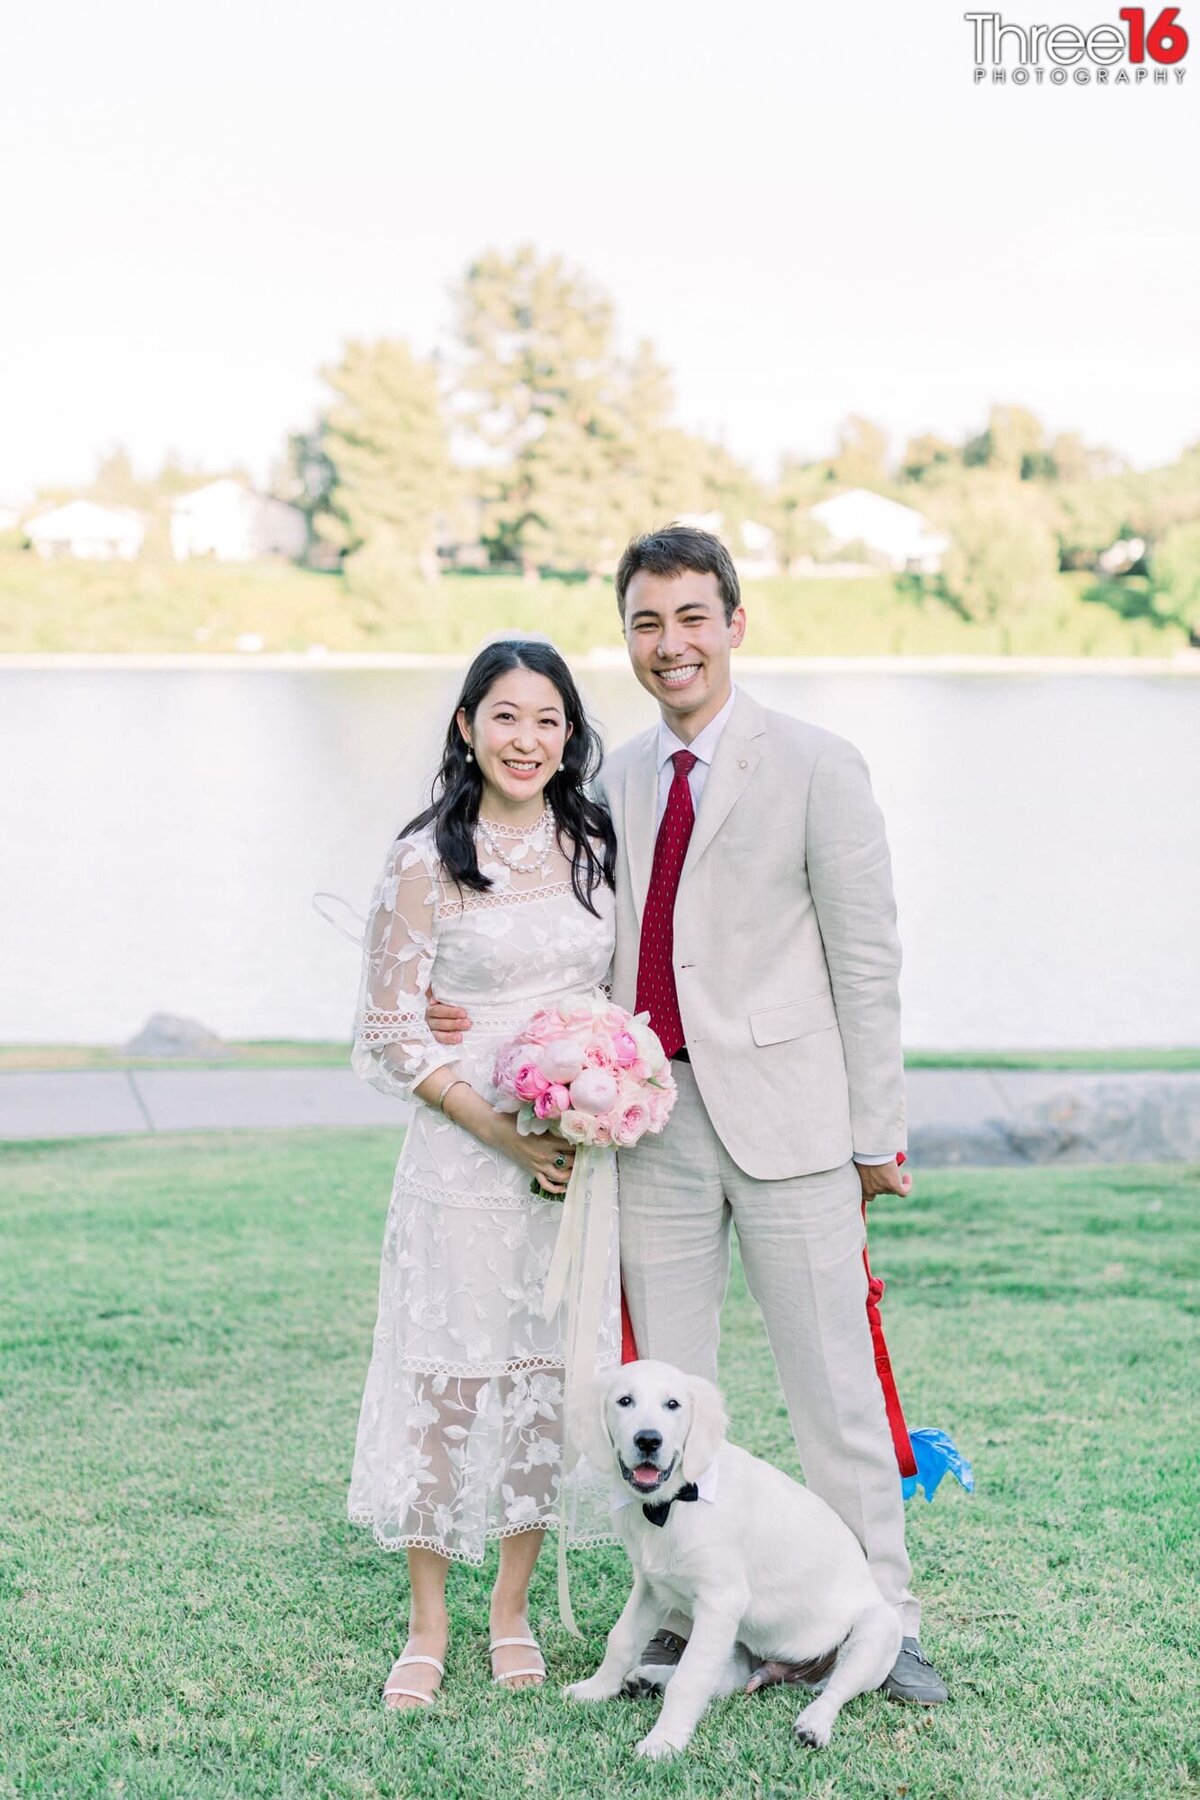 Bride and Groom pose with their little white dog